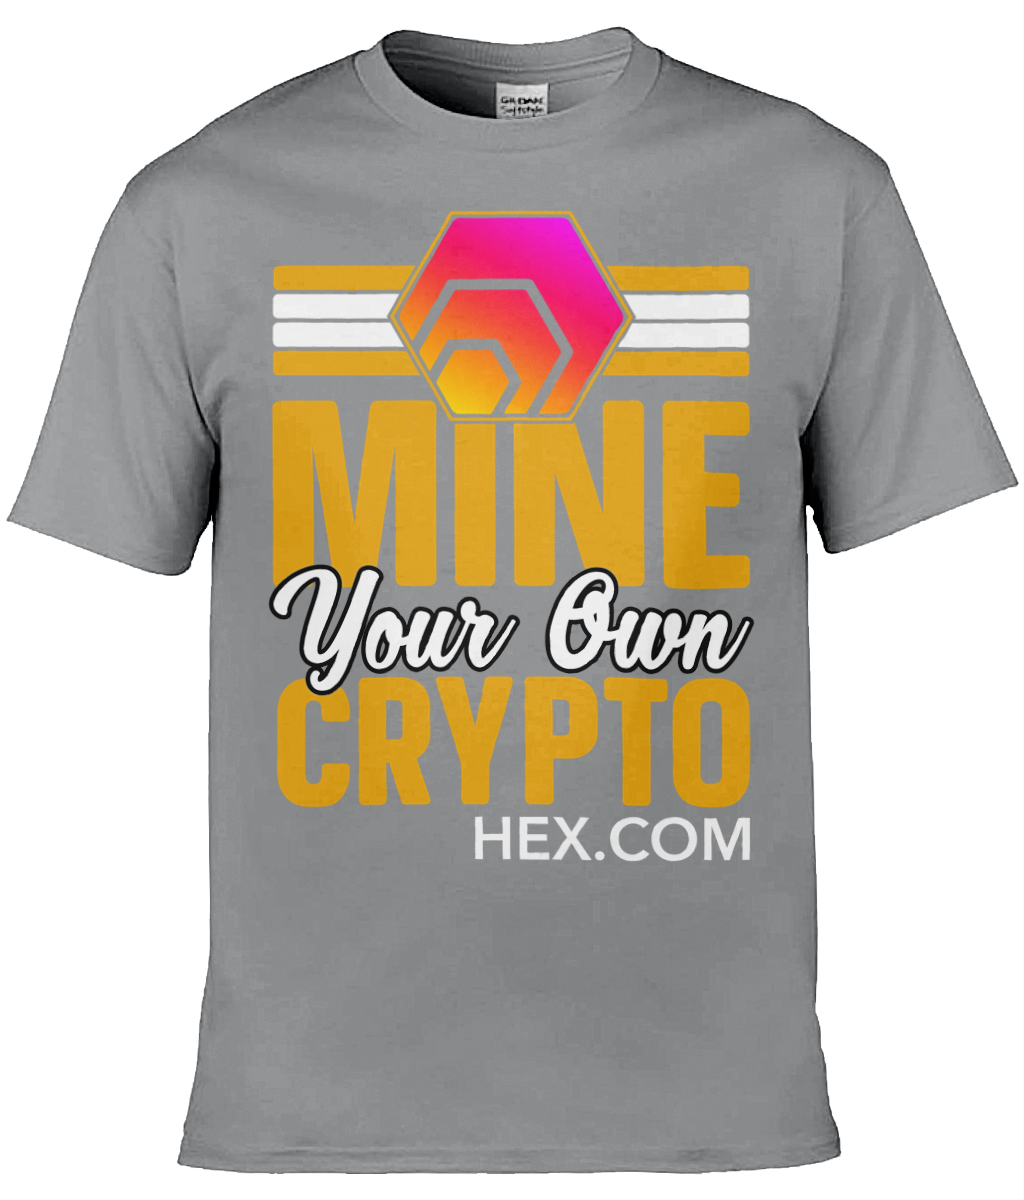 Mine Your Own Crypto T-shirt, HEX Unisex T-shirt